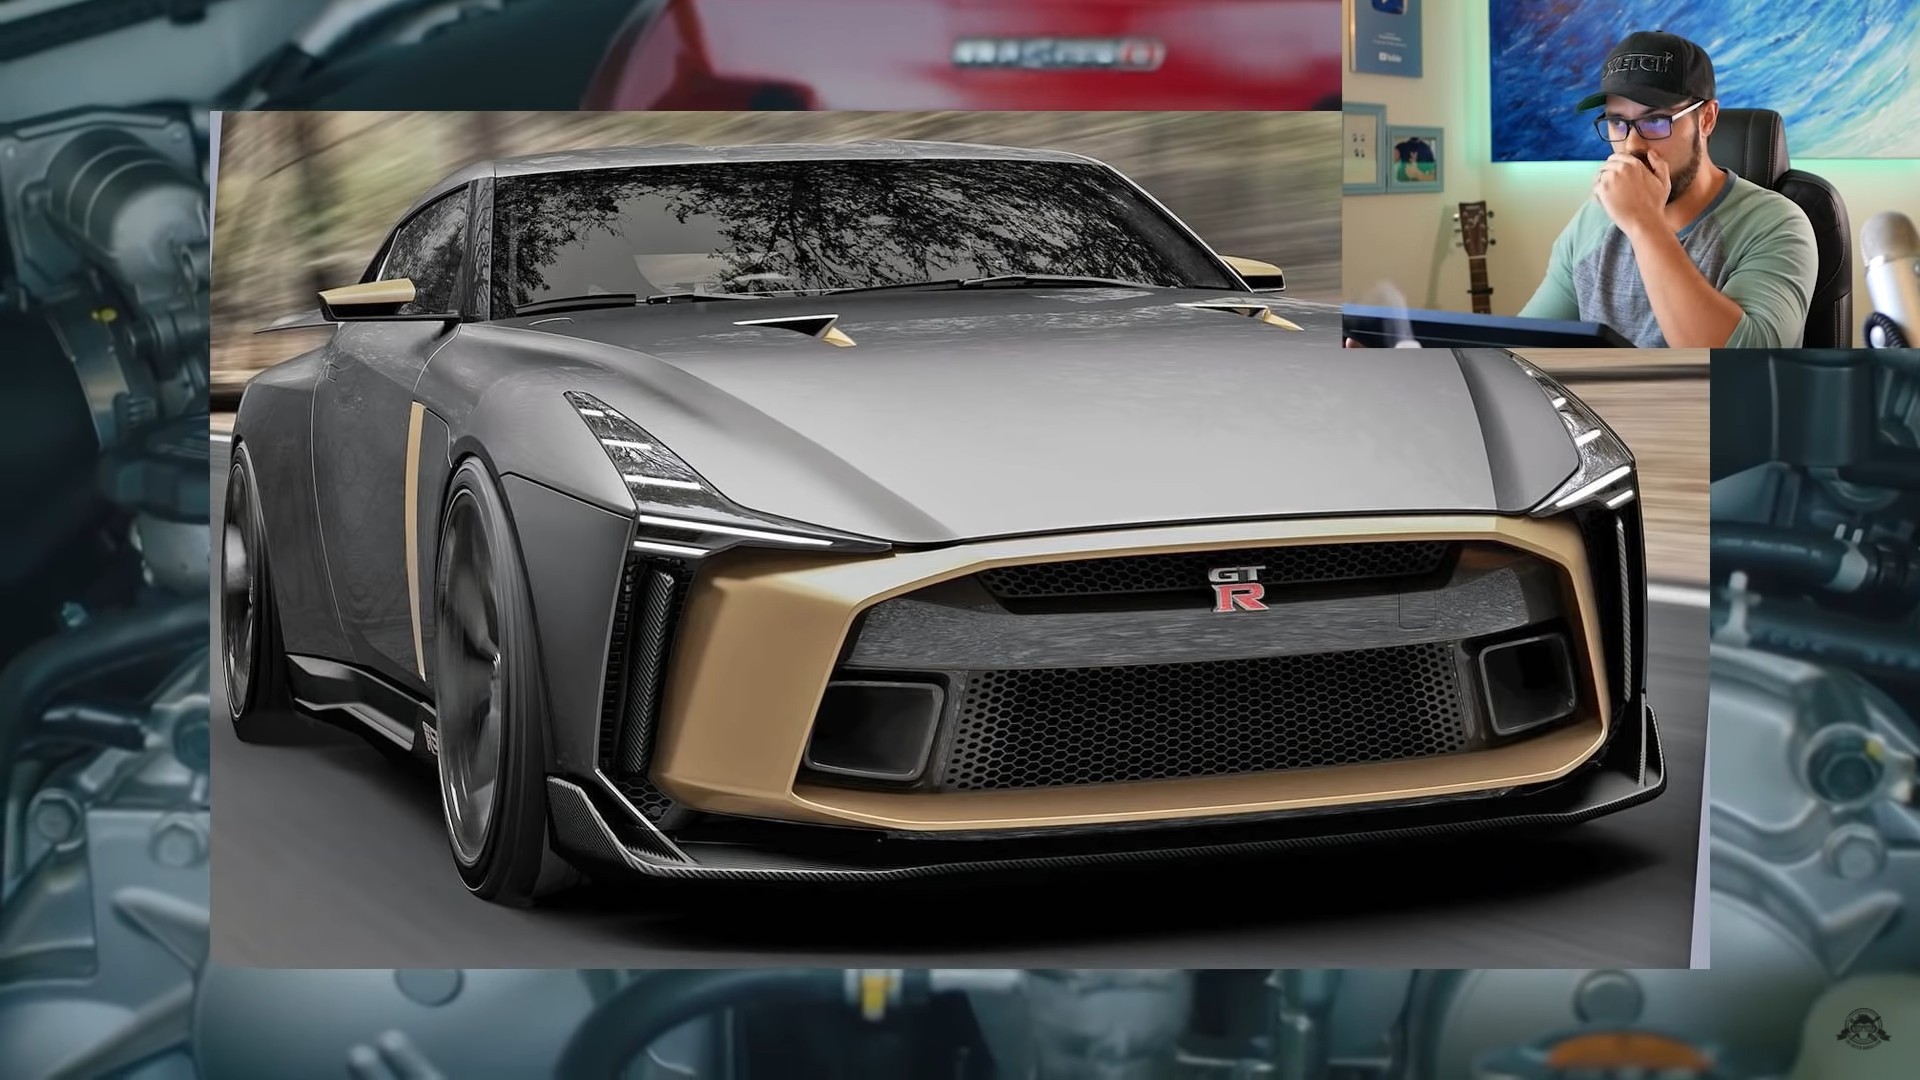 EXCLUSIVE: This Nissan GT-R R36 Render Reminds Us That A New Generation Is  Definitely Long Overdue